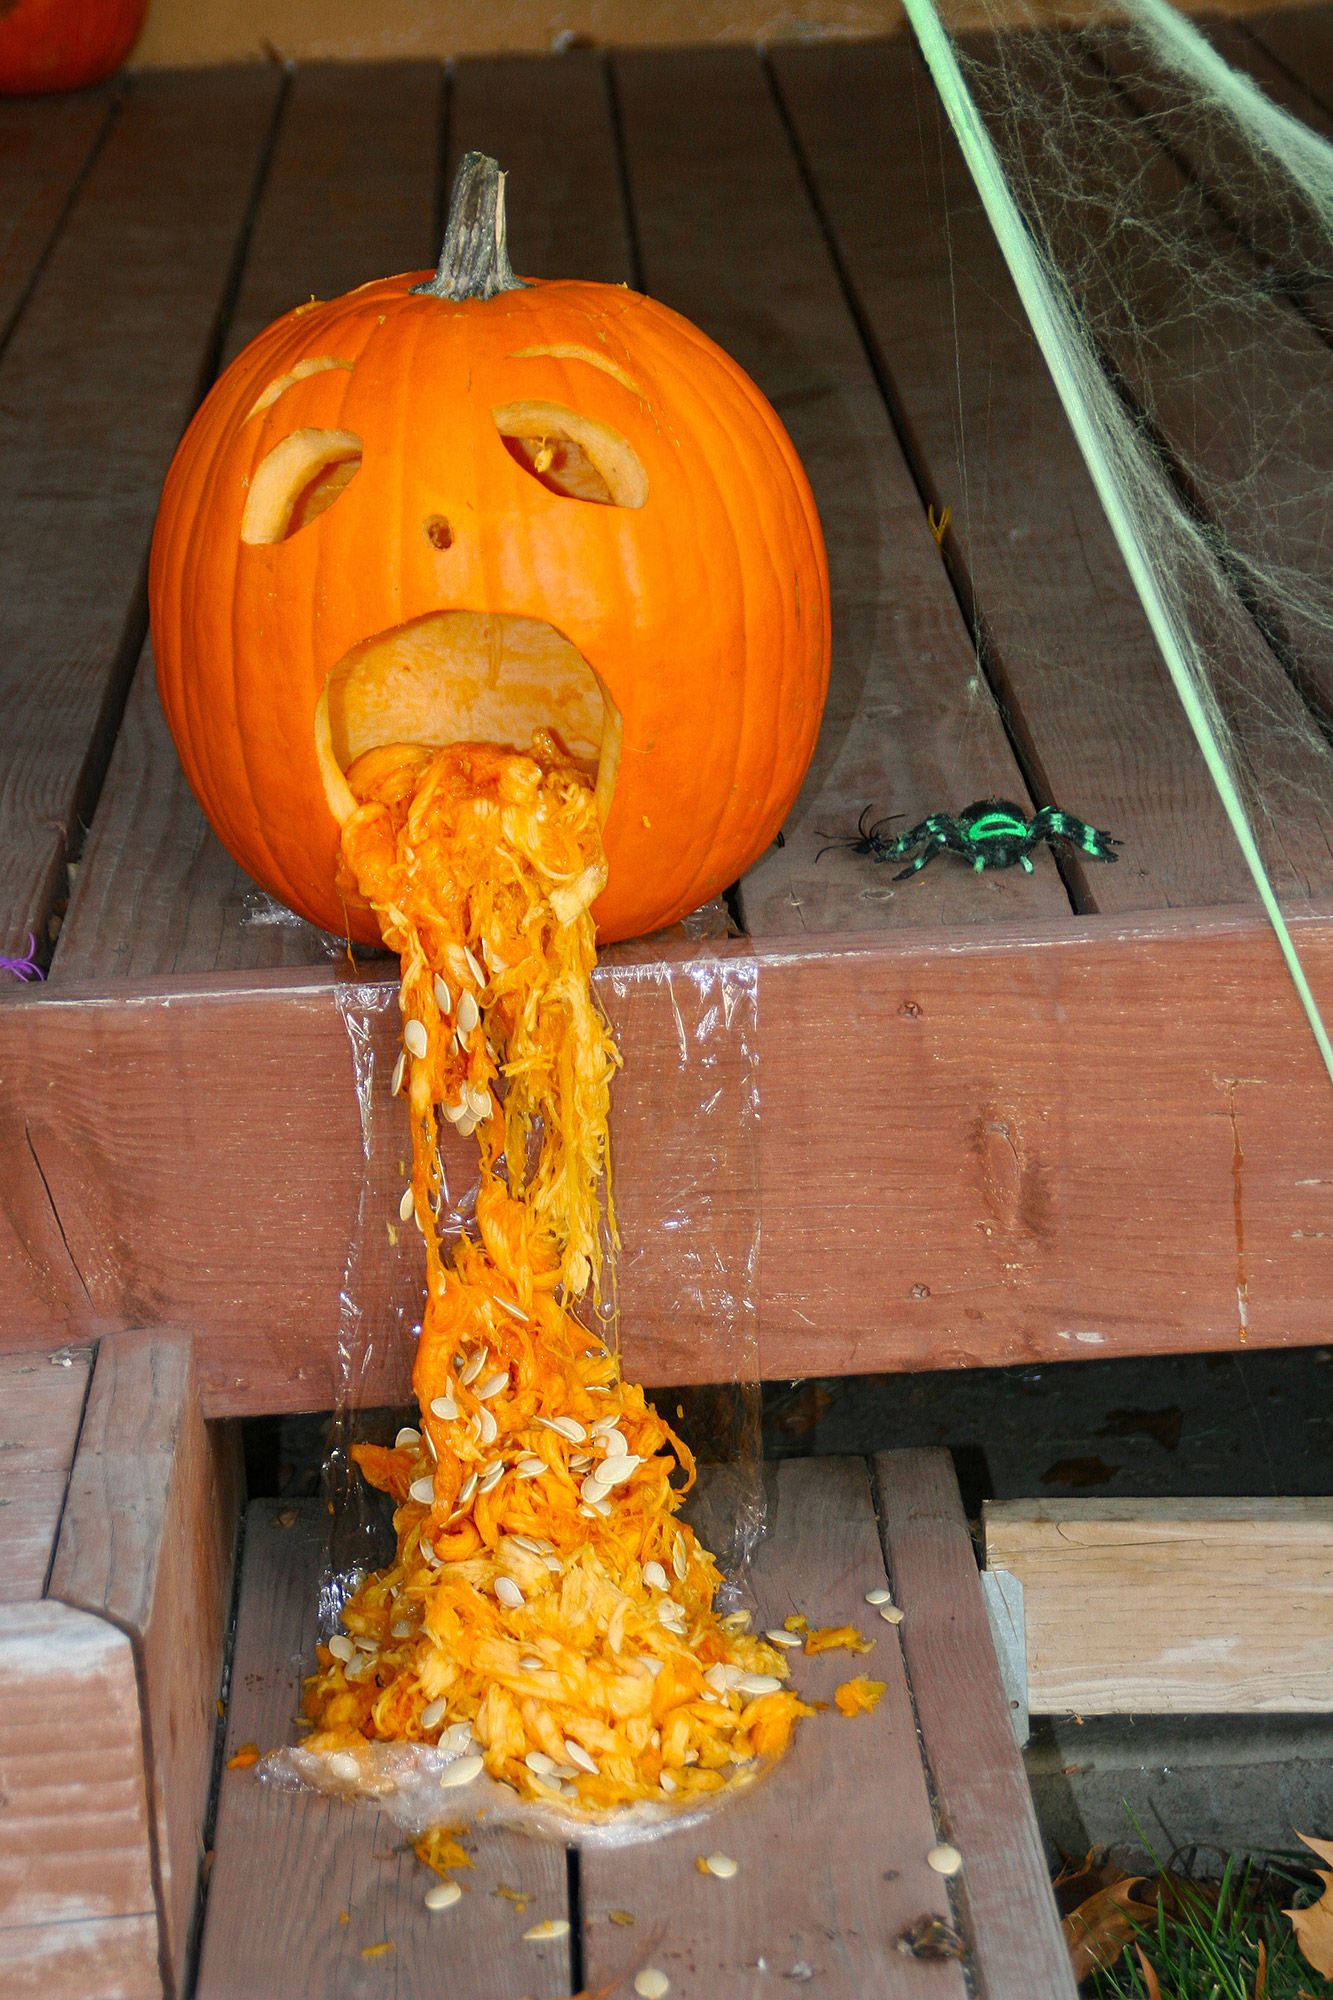 10 Reasons These Pumpkins Are Puking